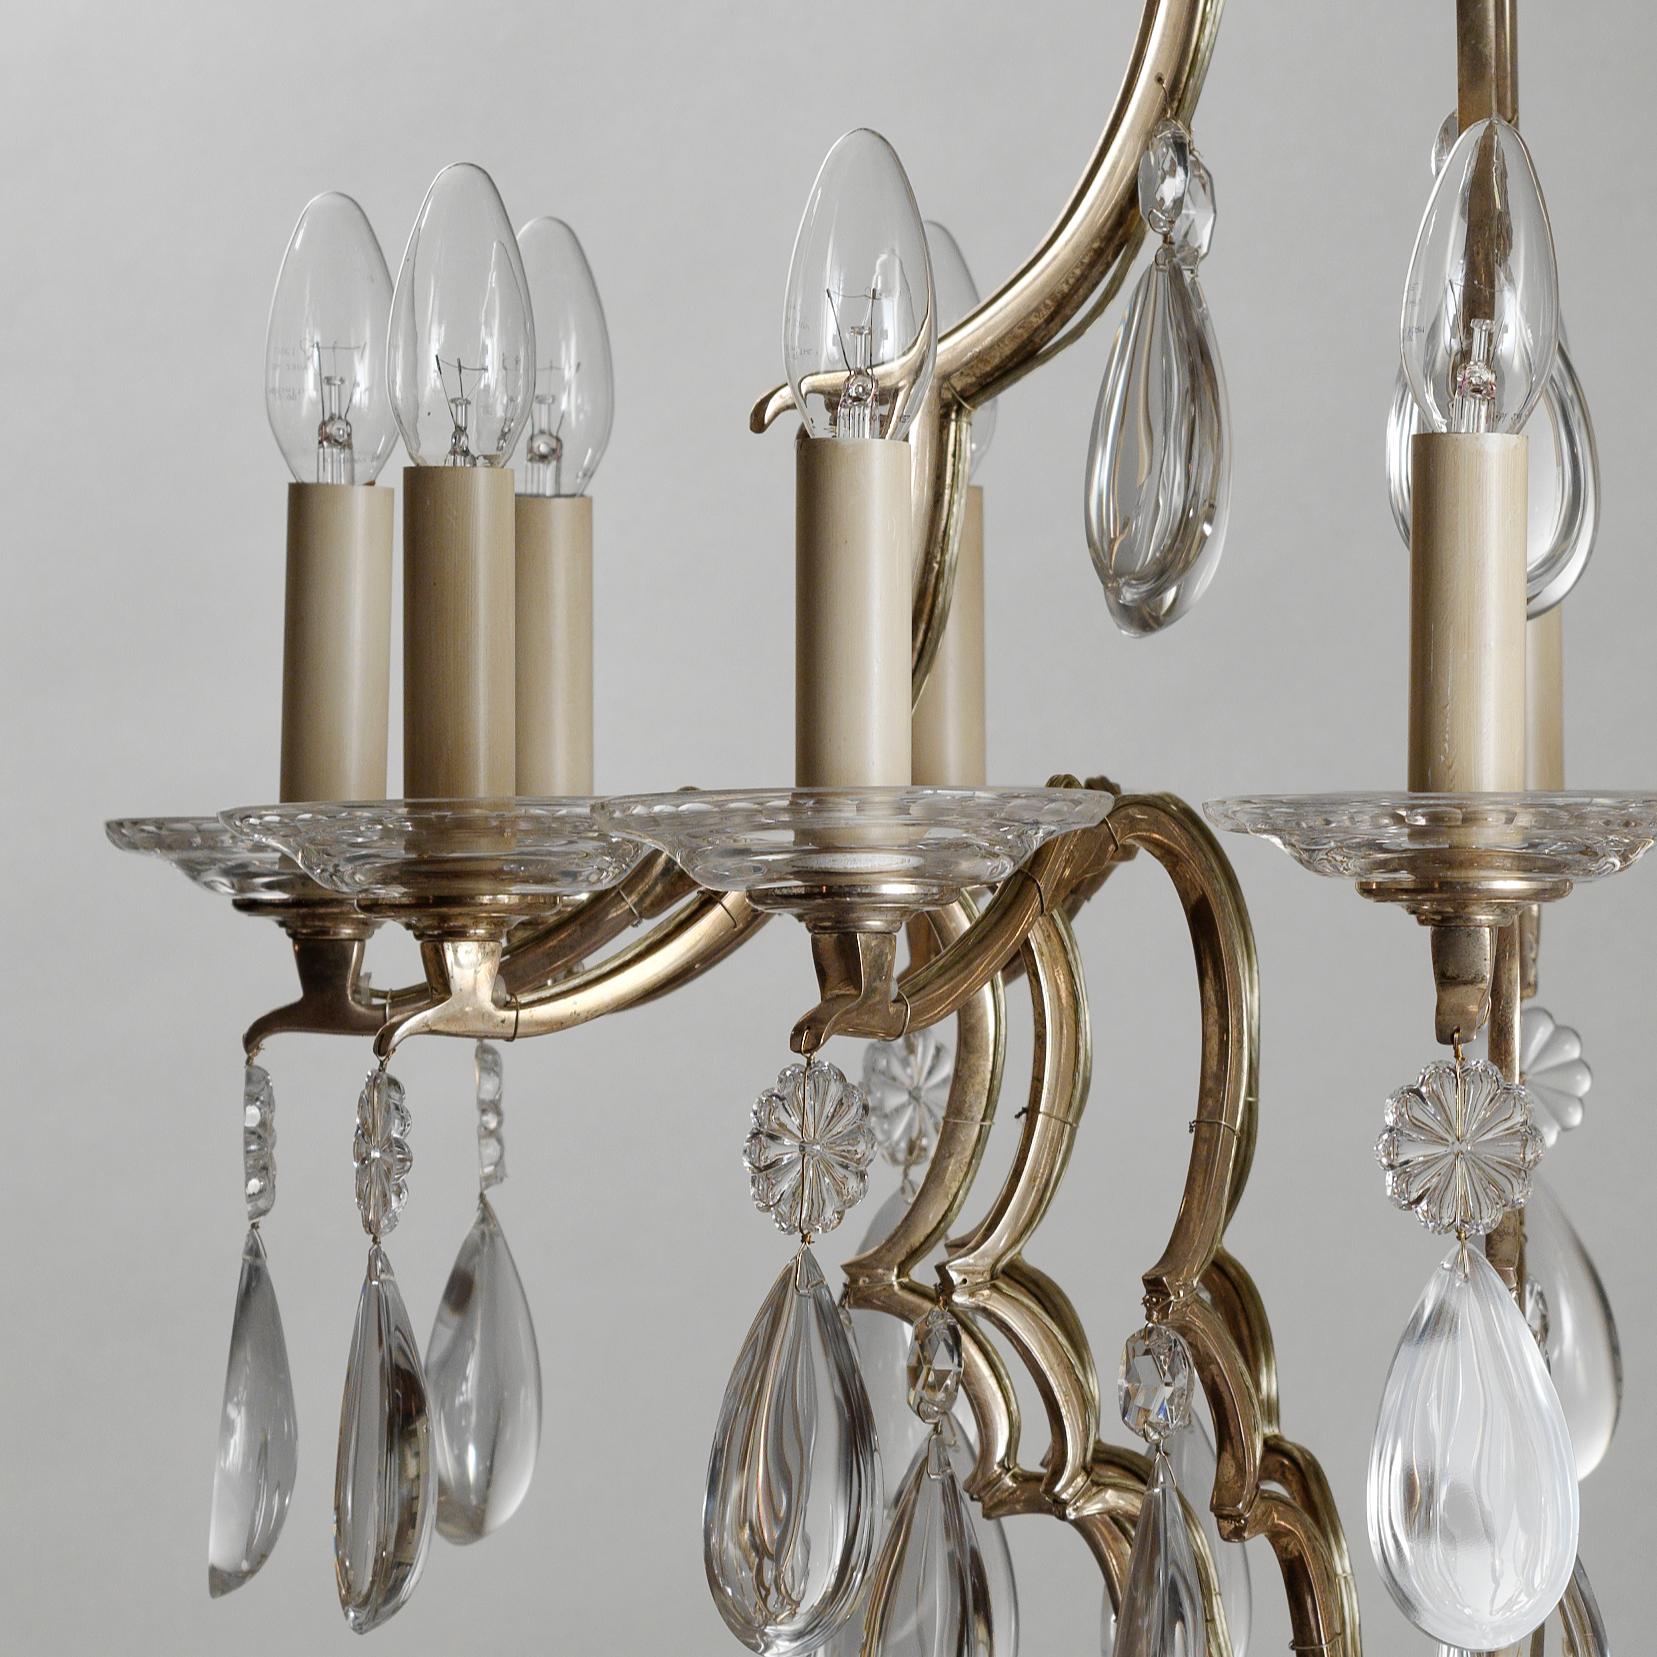 Louis XIV Style Silvered Bronze and Crystal Chandelier by Gherardo Degli Albizzi: birdcage chandelier in silvered bronze with rosettes and big crystal drops.
This chandelier features twelve lights and each arms has spurs from which crystals hang.